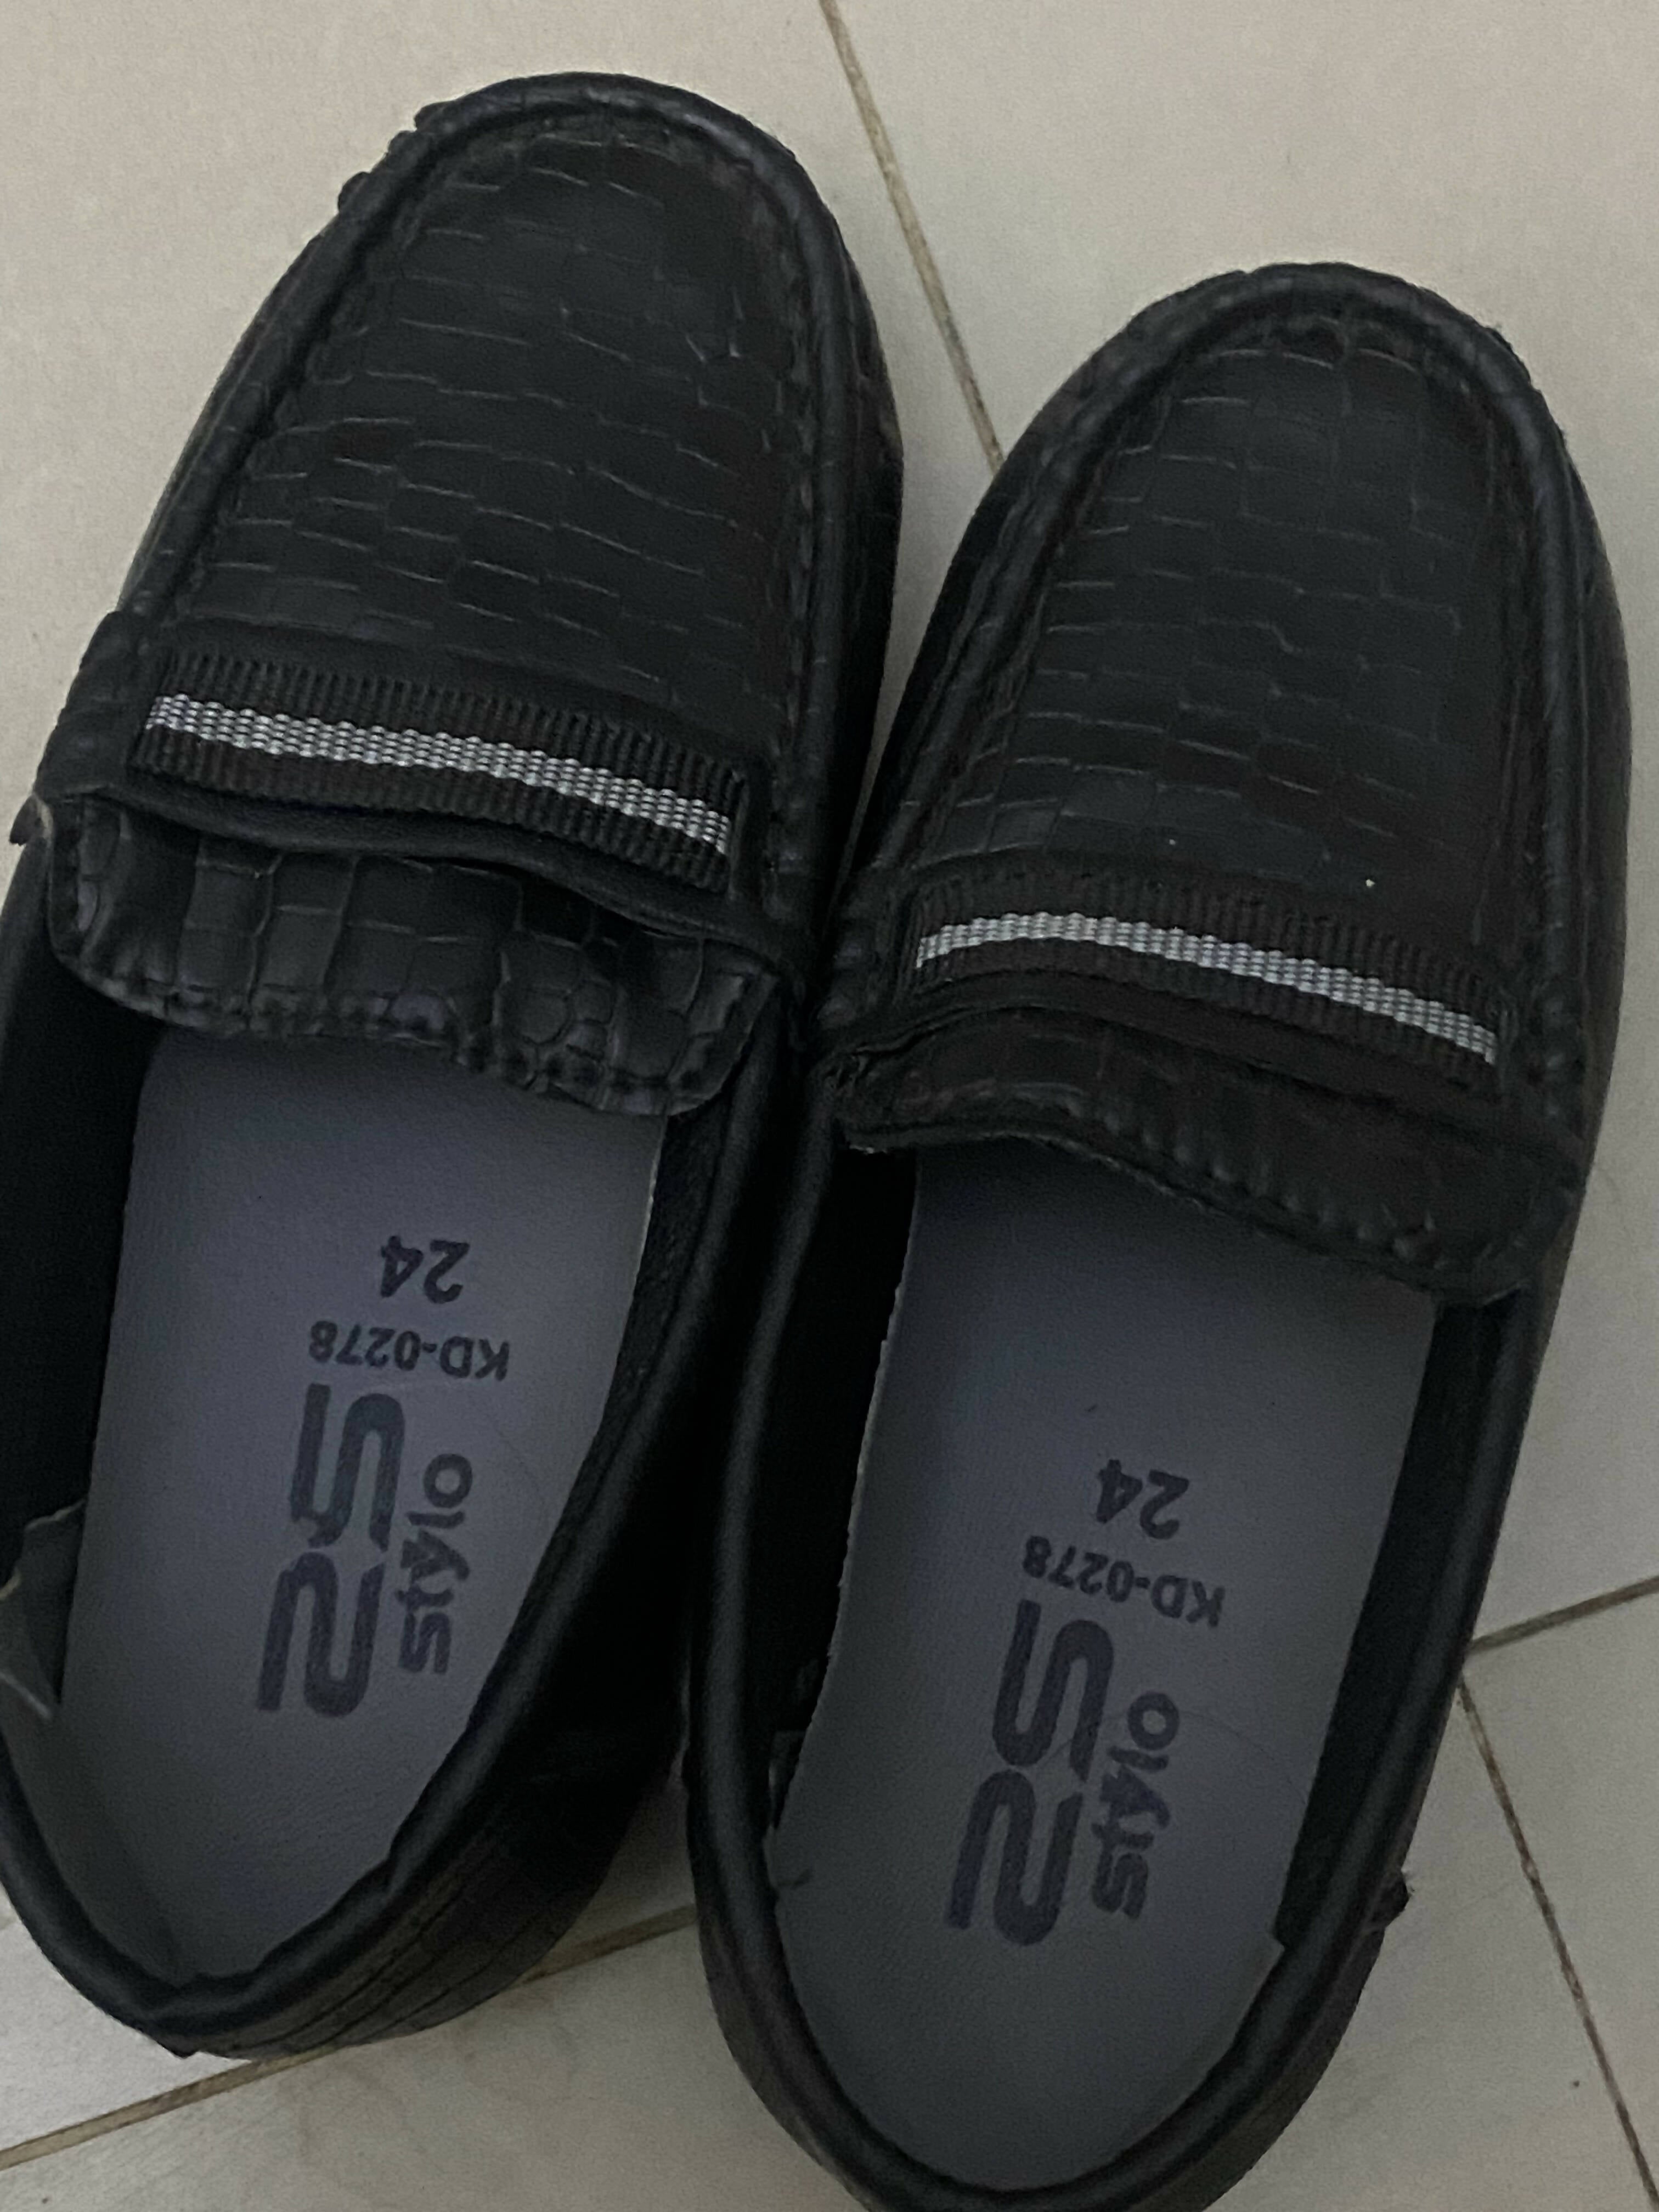 Black Shoes (Size: 24 ) | Boys Shoes | Worn Once